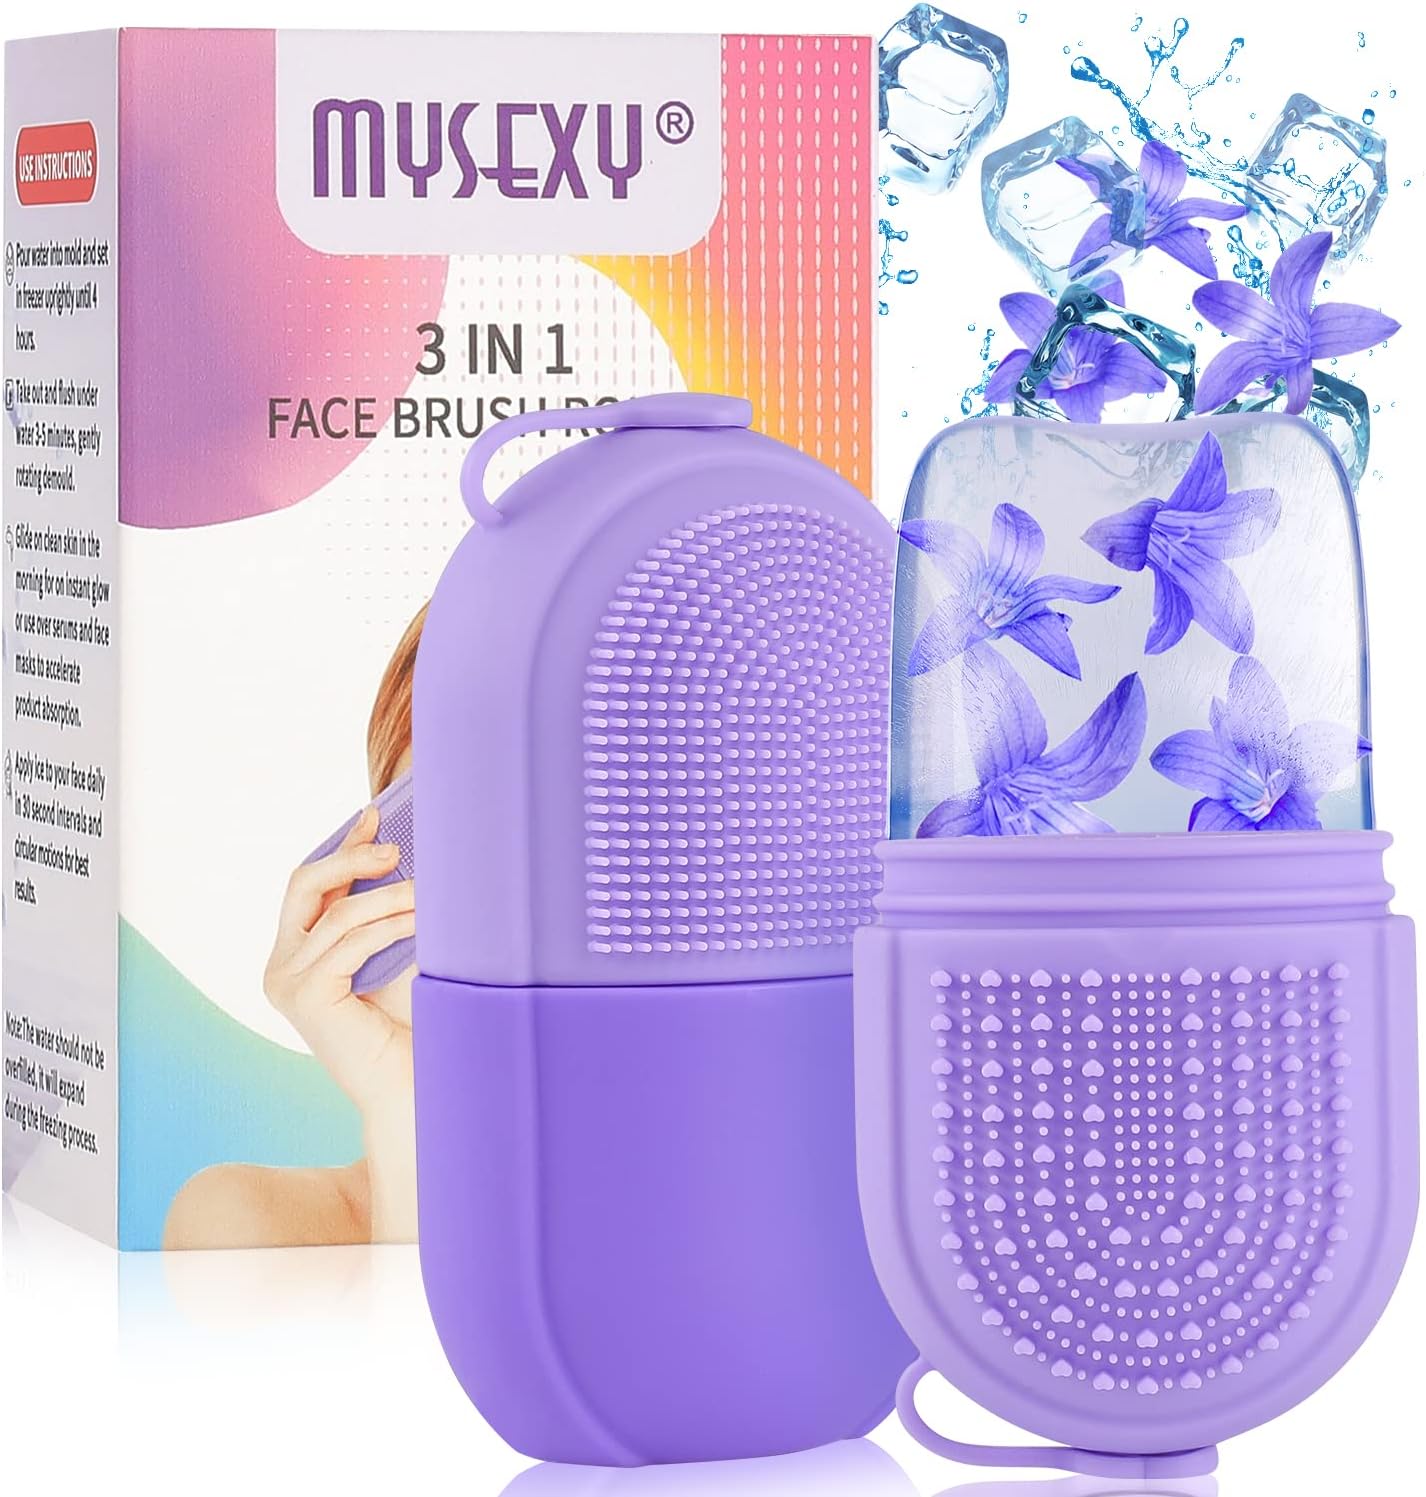 MYSEXY Ice Roller for Face  Eye, Beauty Facial Ice Rollers Ice Holder Mold Face Puffiness Relief Massage Skin Care Tools for Brighten Lubricate Shrink Pores Remove Fine Lines (Purple)